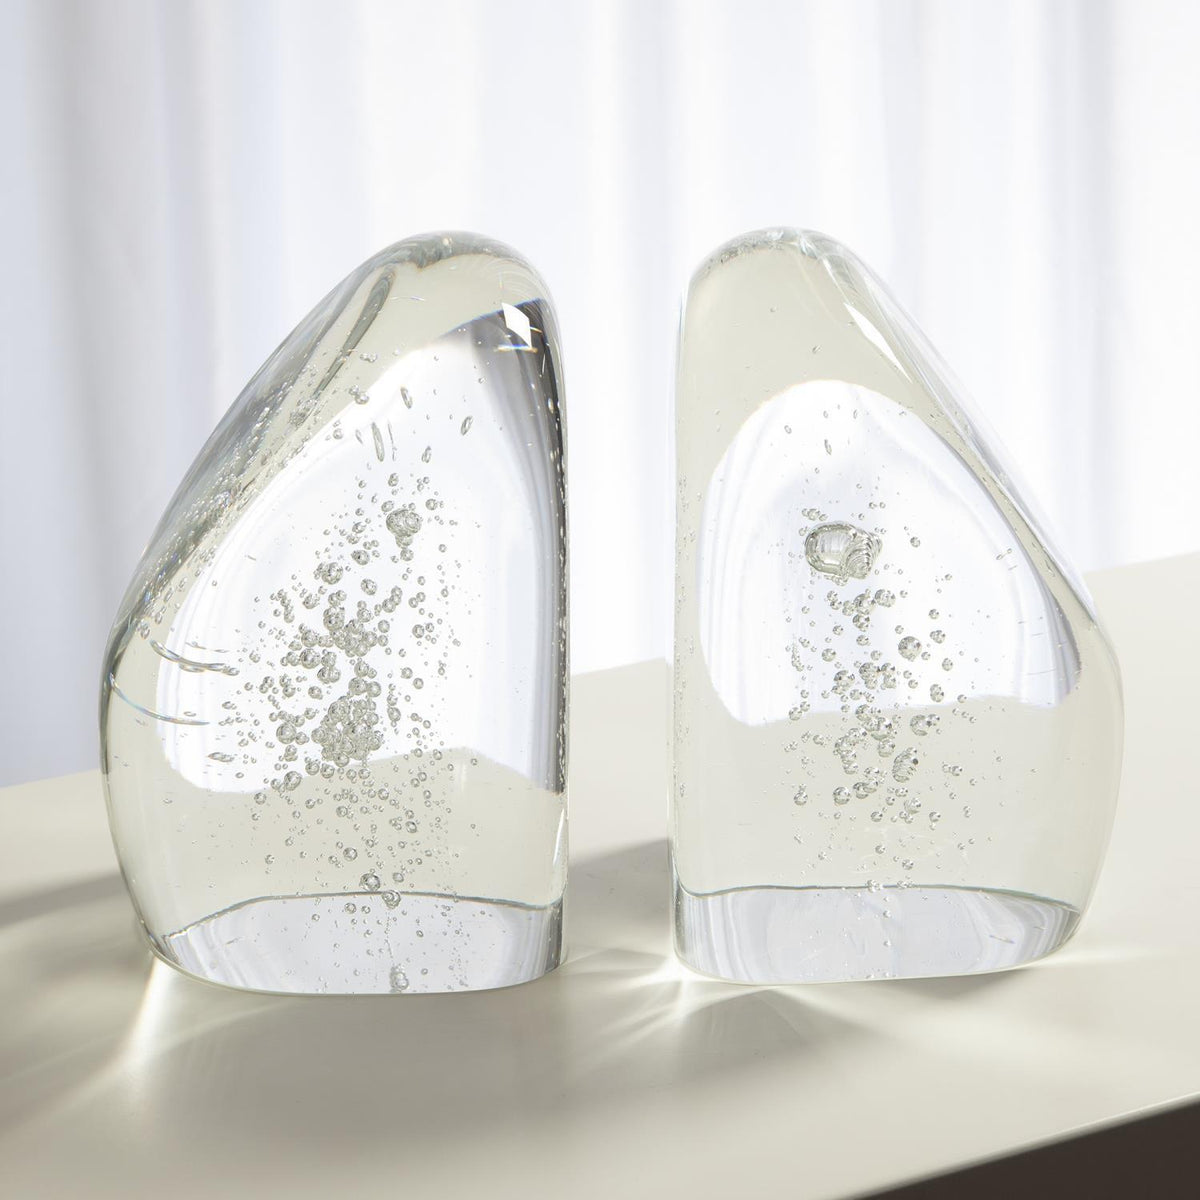 Chunk Bookends-Clear w/Bubbles-Global Views-Office Accessories-Artistic Elements